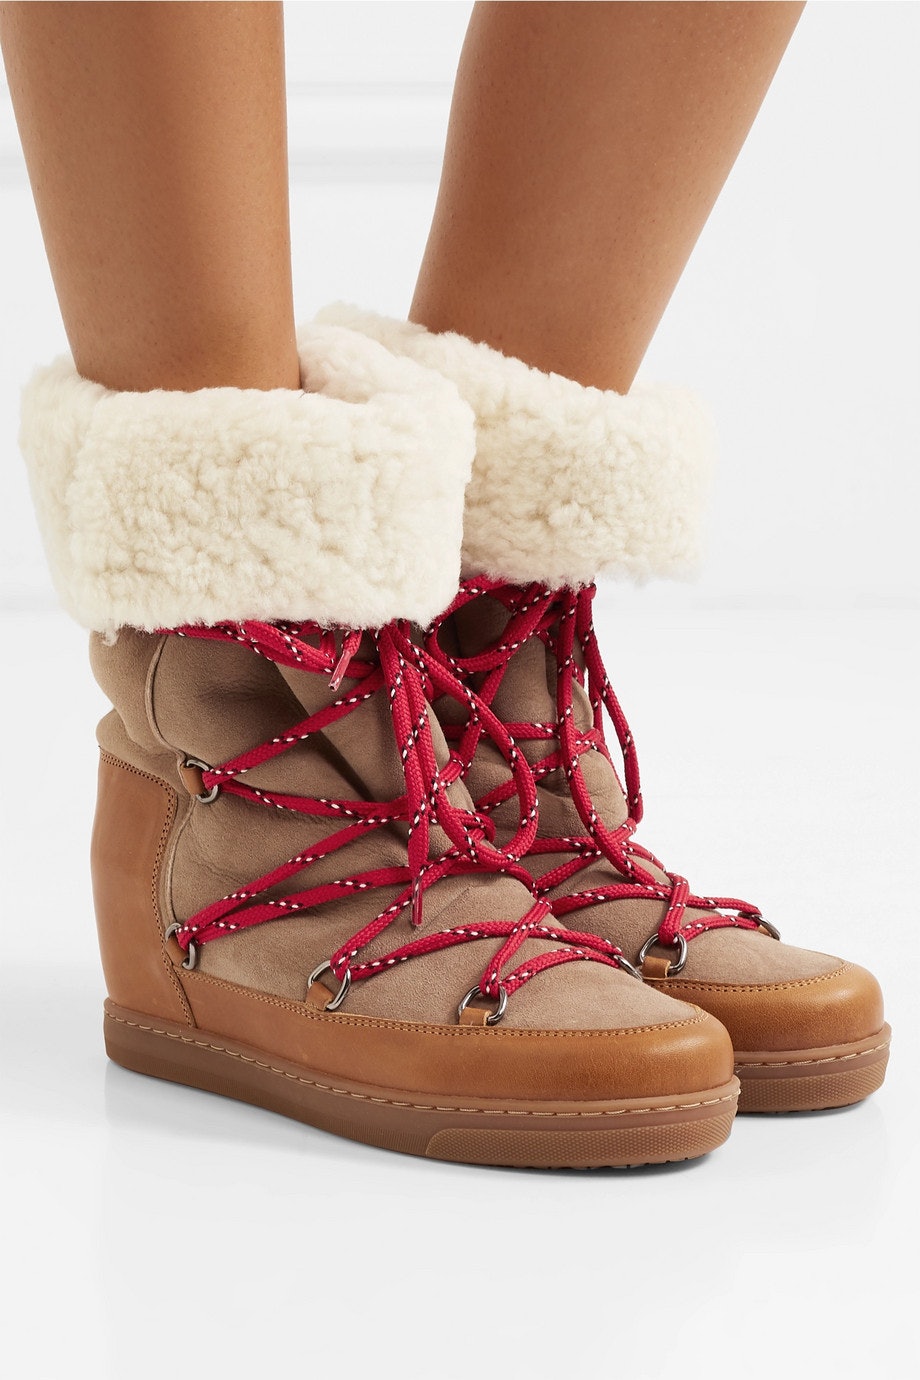 winter boots with shearling lining